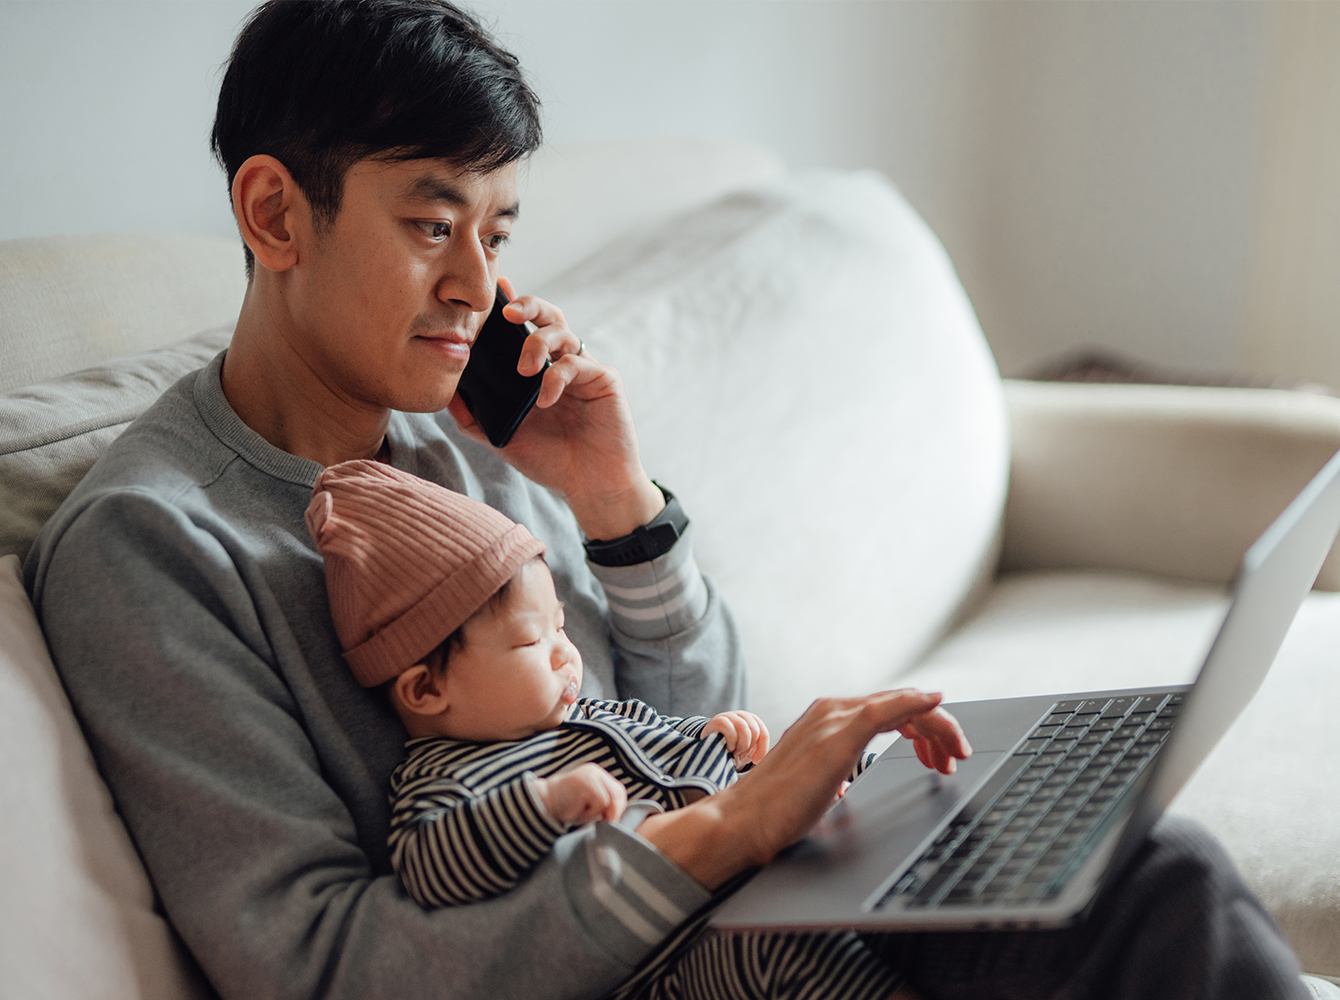 A man with a baby in his lap holds a cellphone to his ear while working on a laptop.